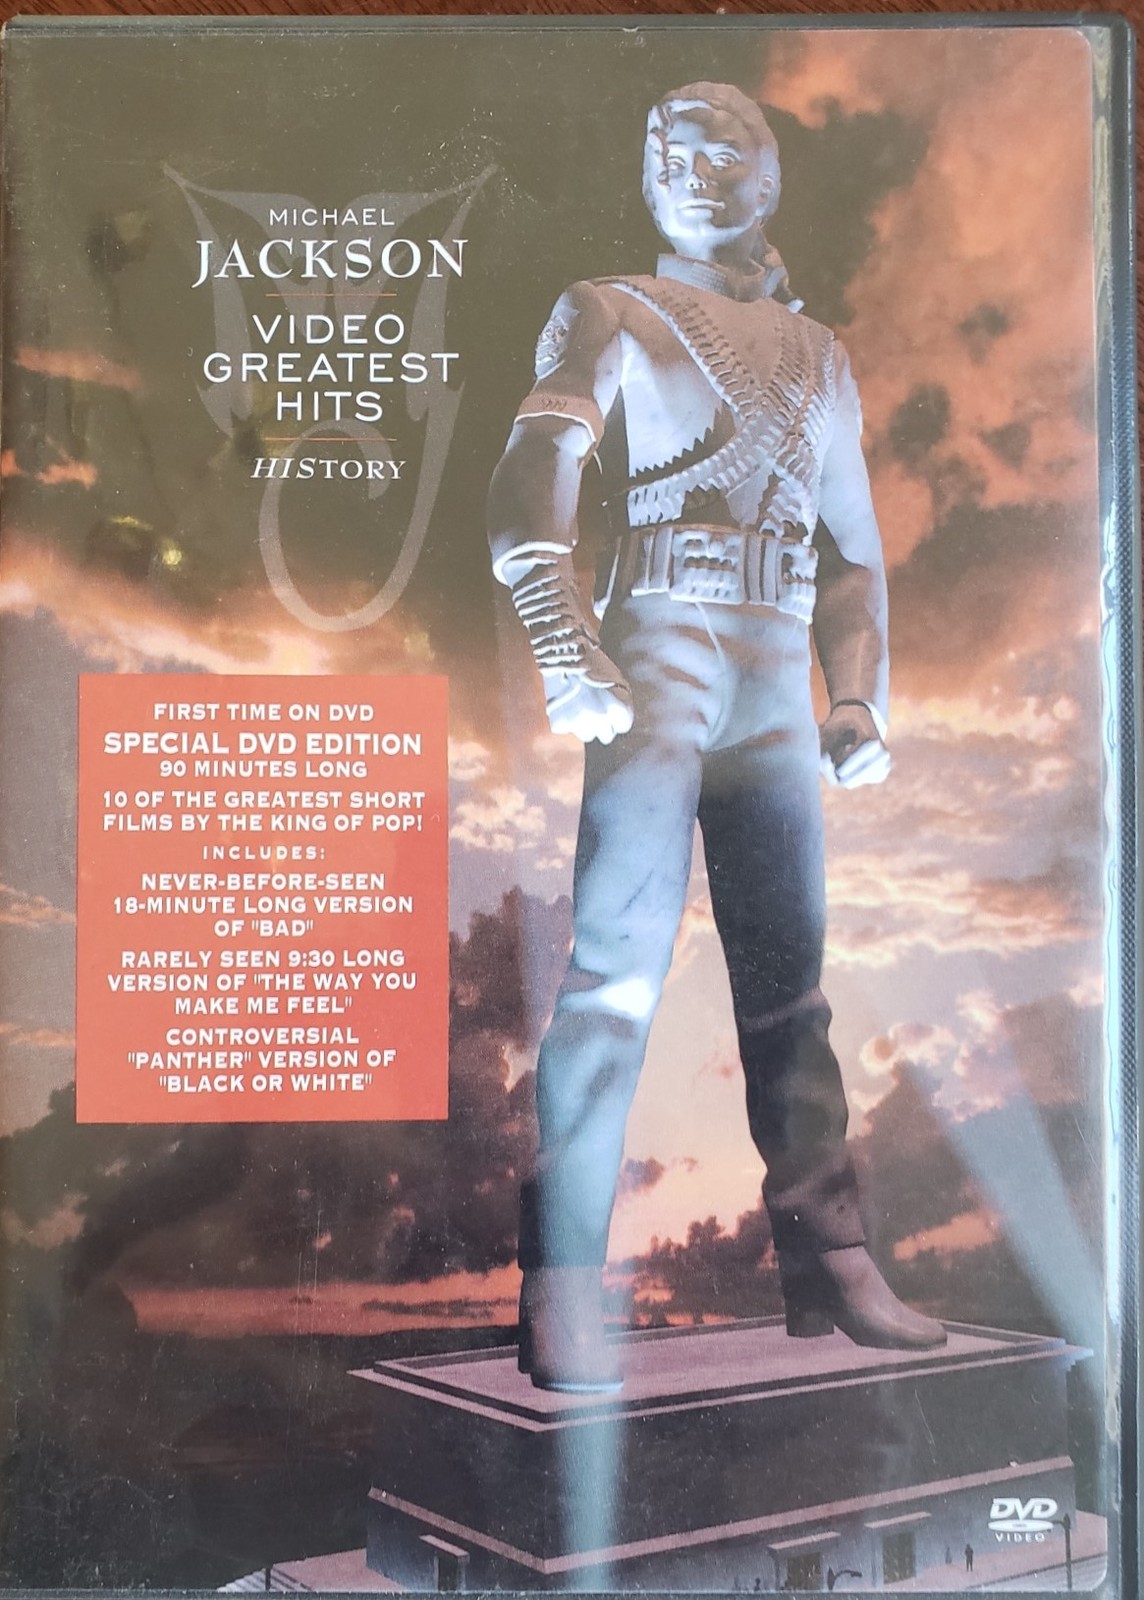 Primary image for Michael Jackson Video Greatest Hits History Special DVD Edition